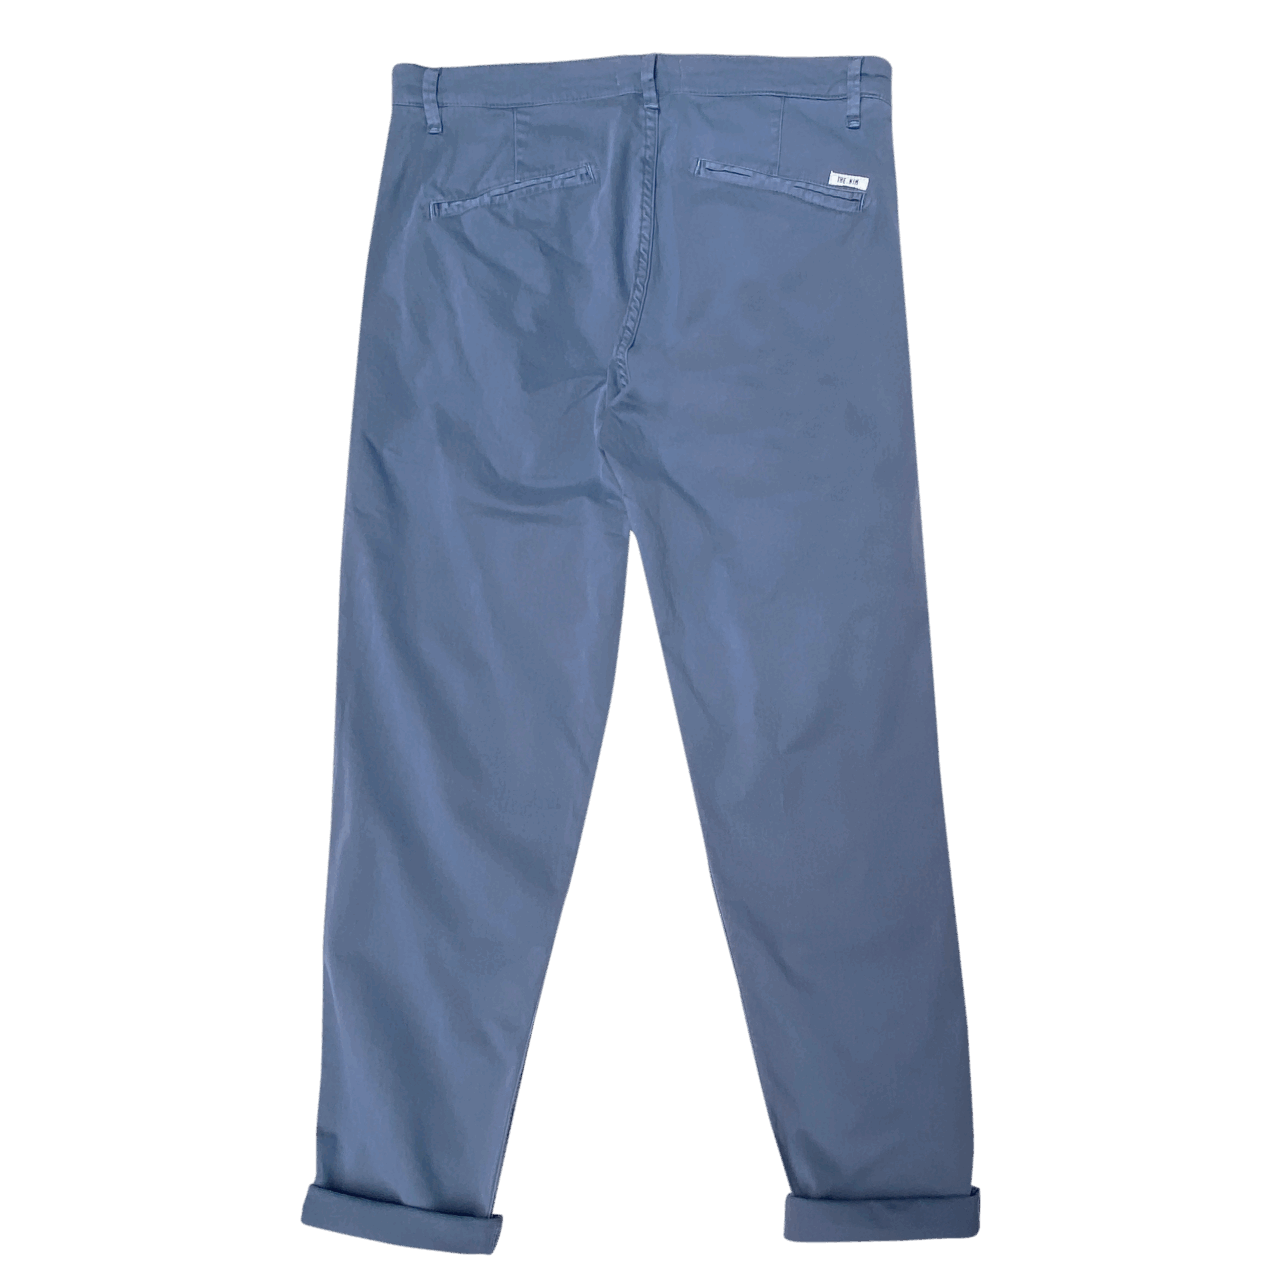 THE.NIM Chino Pince Slim Tapared Fit - mid blue